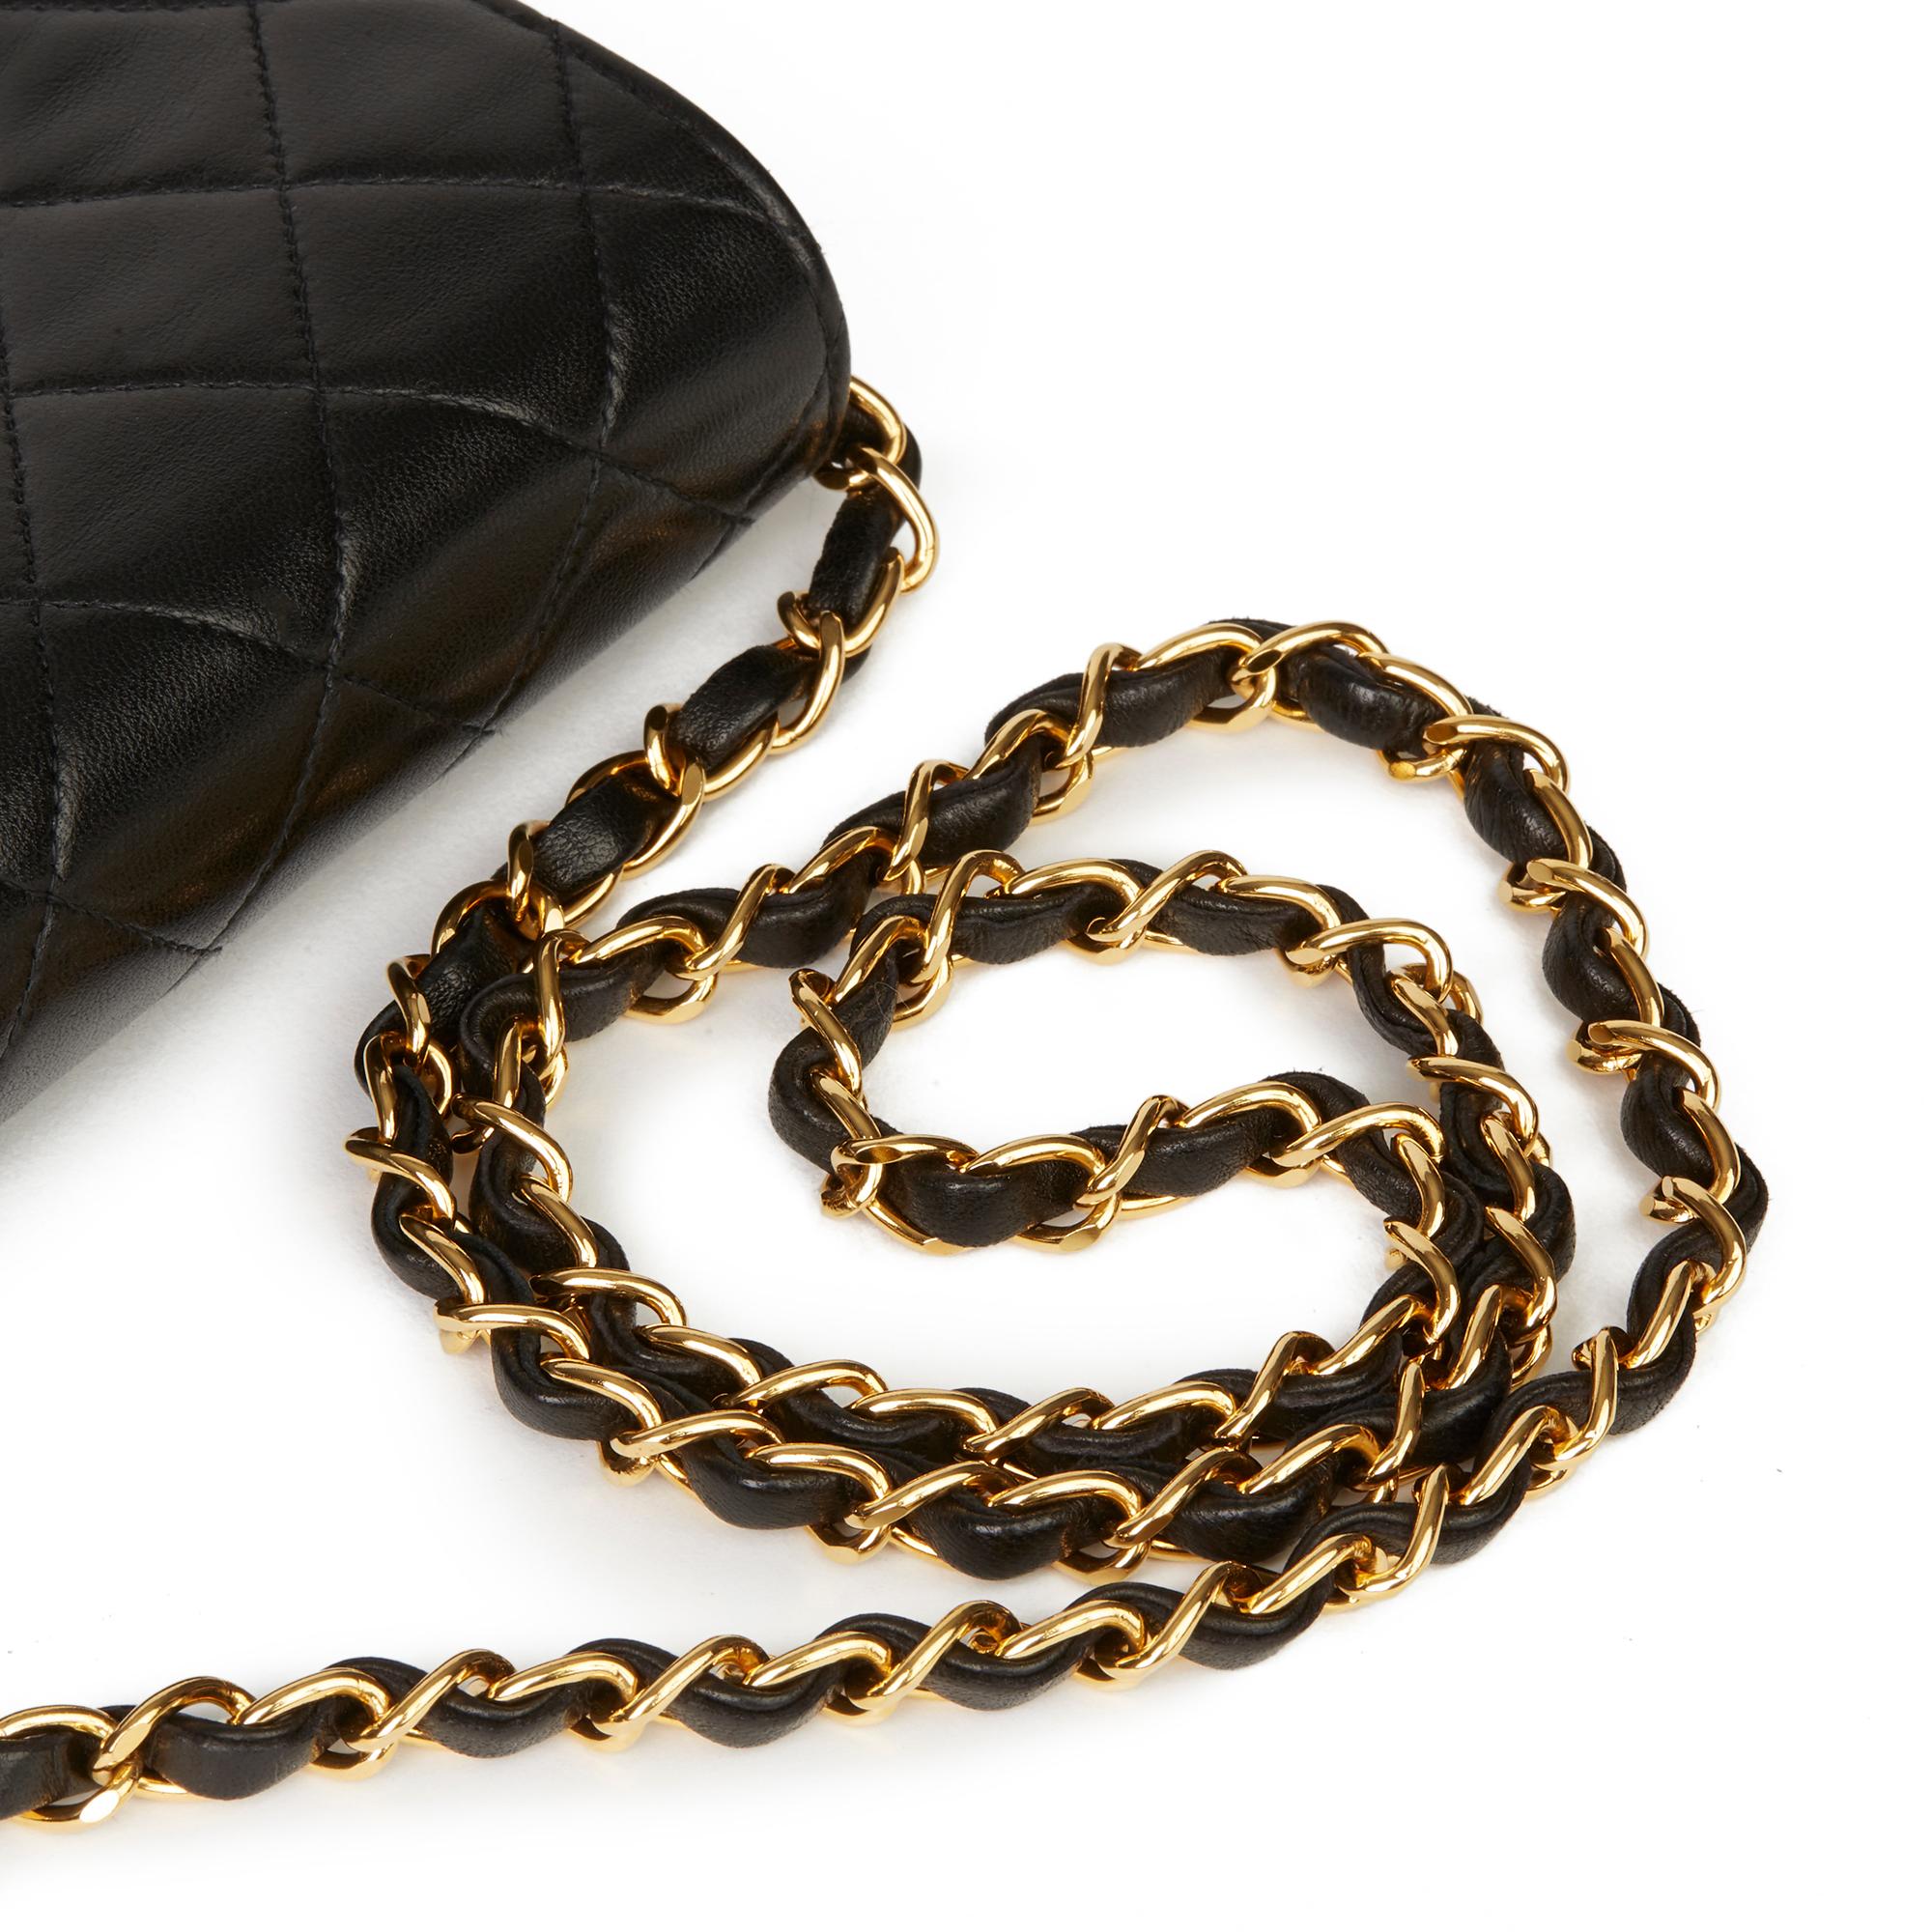 1994 Chanel Black Quilted Lambskin Vintage Mini Flap Bag 3